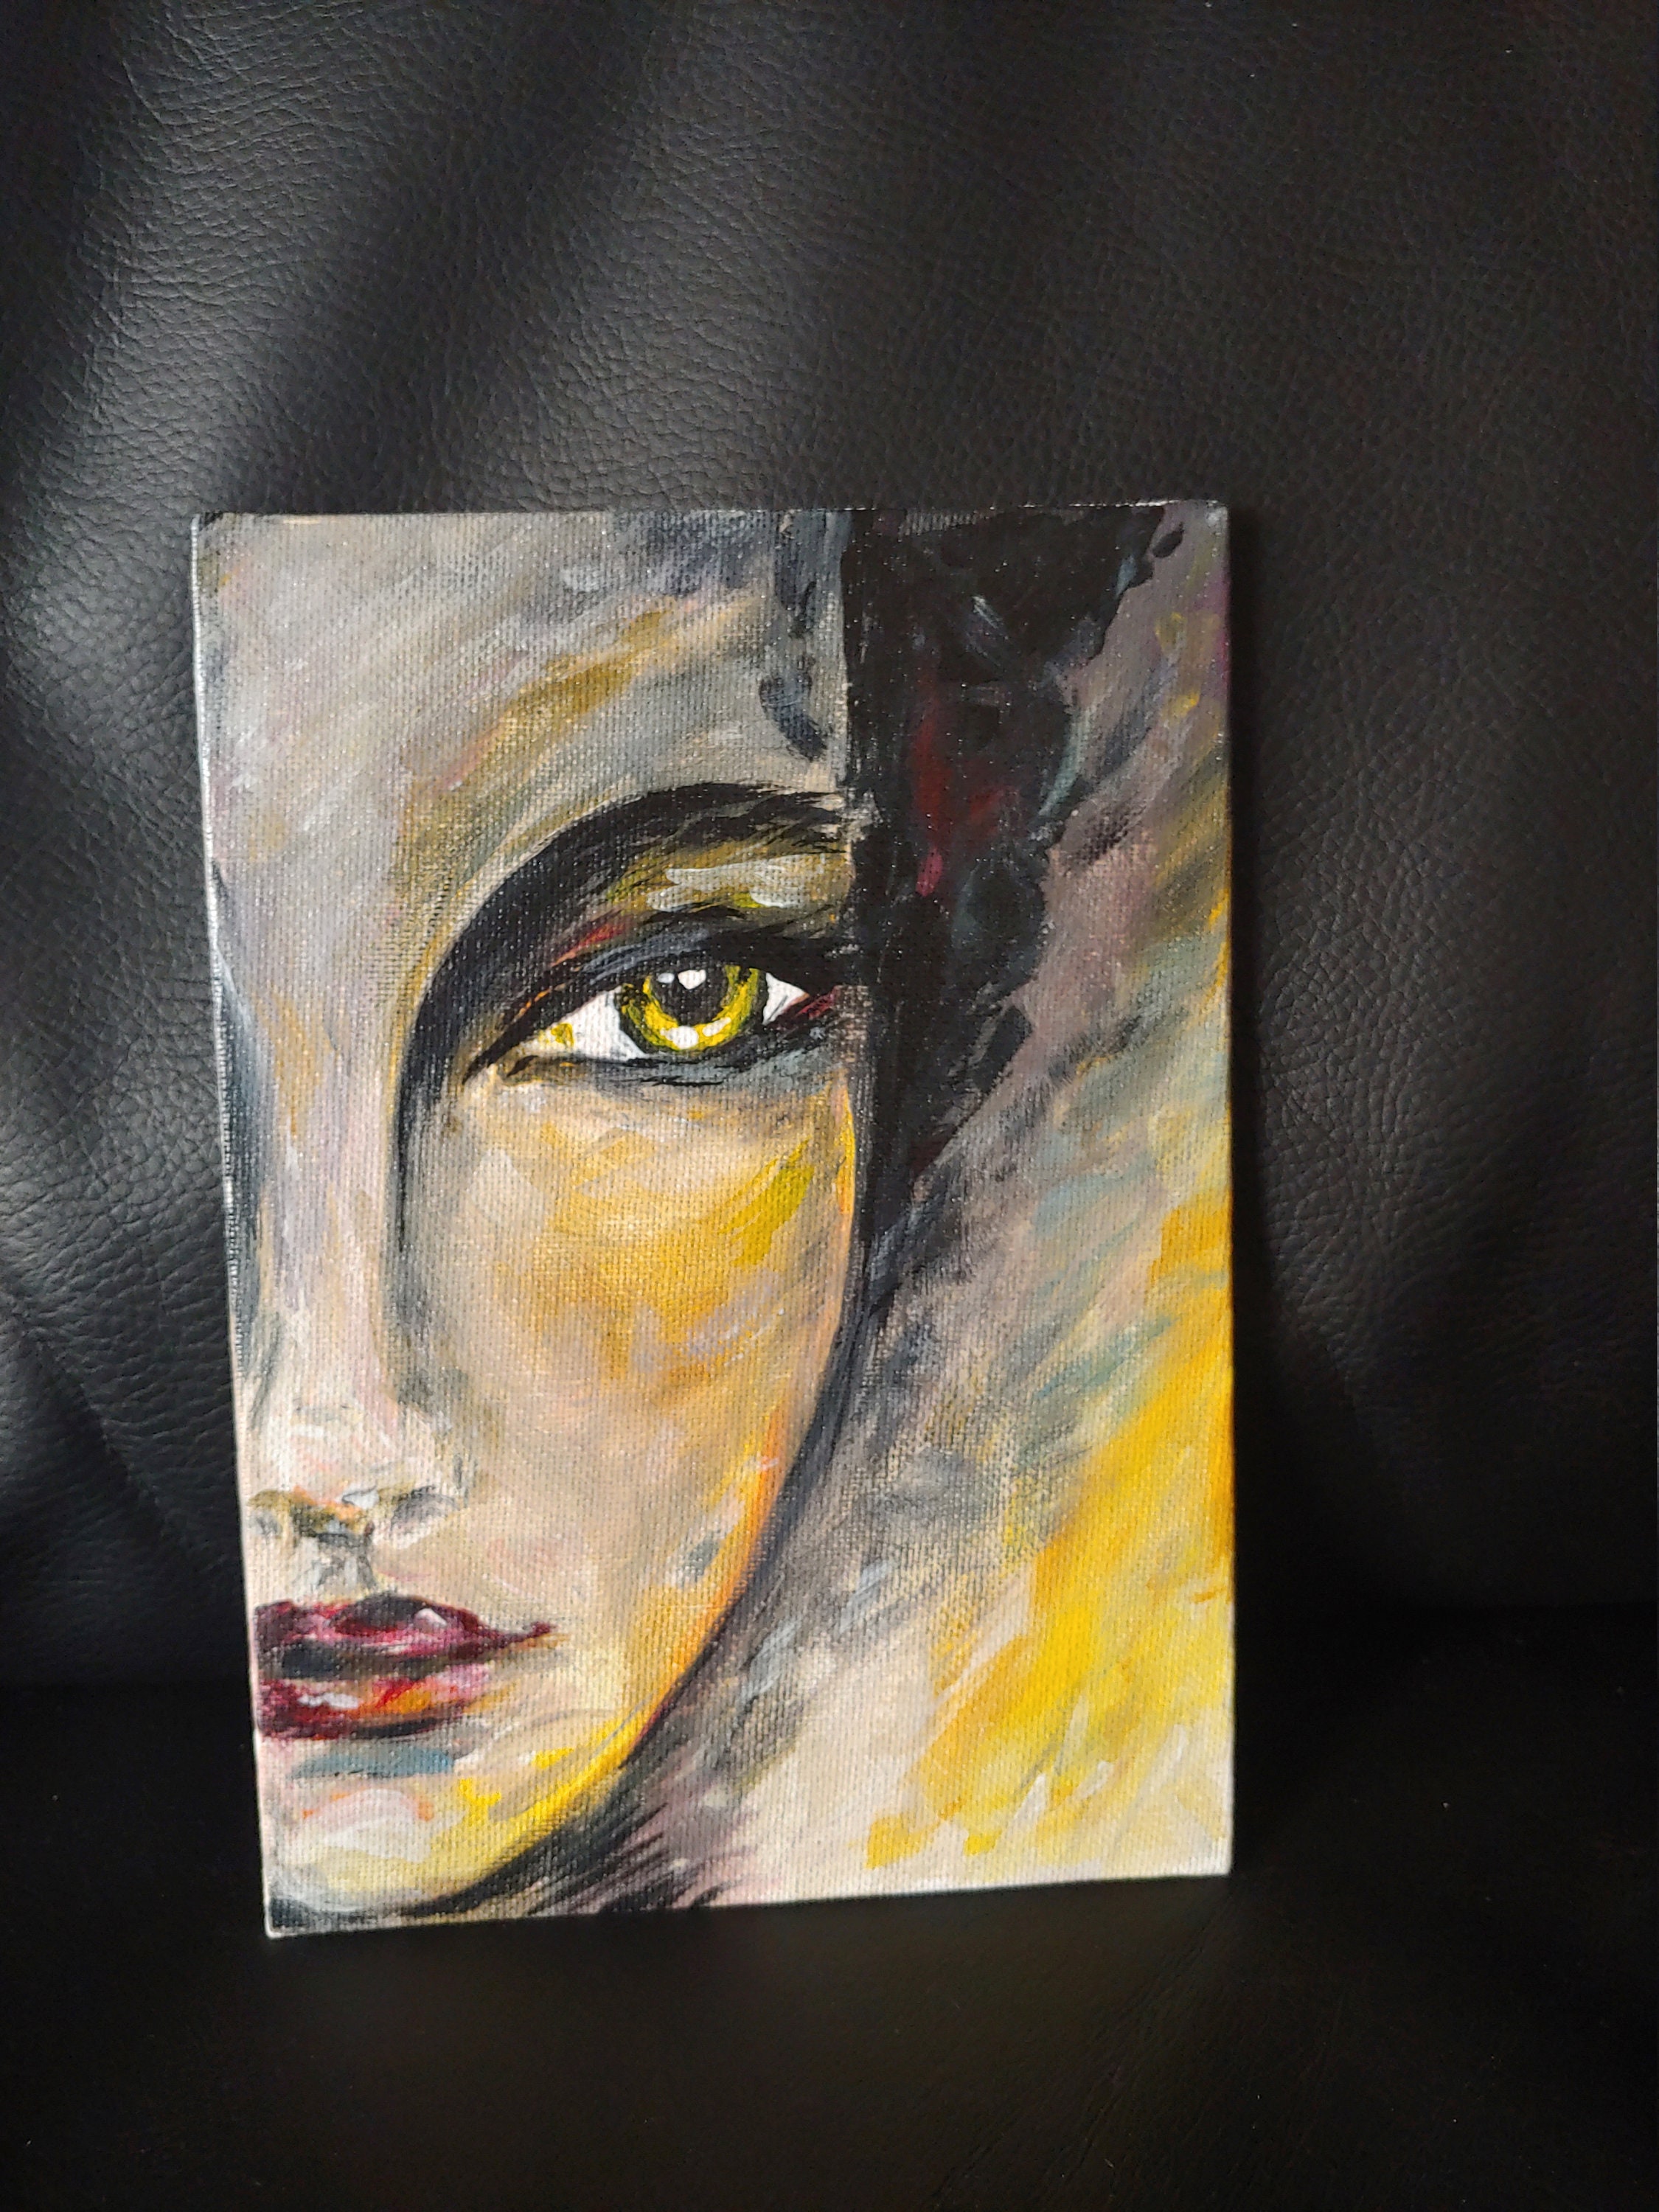 Blue Eyed Woman With a Halo. Original Acrylic 5x7 Painting on